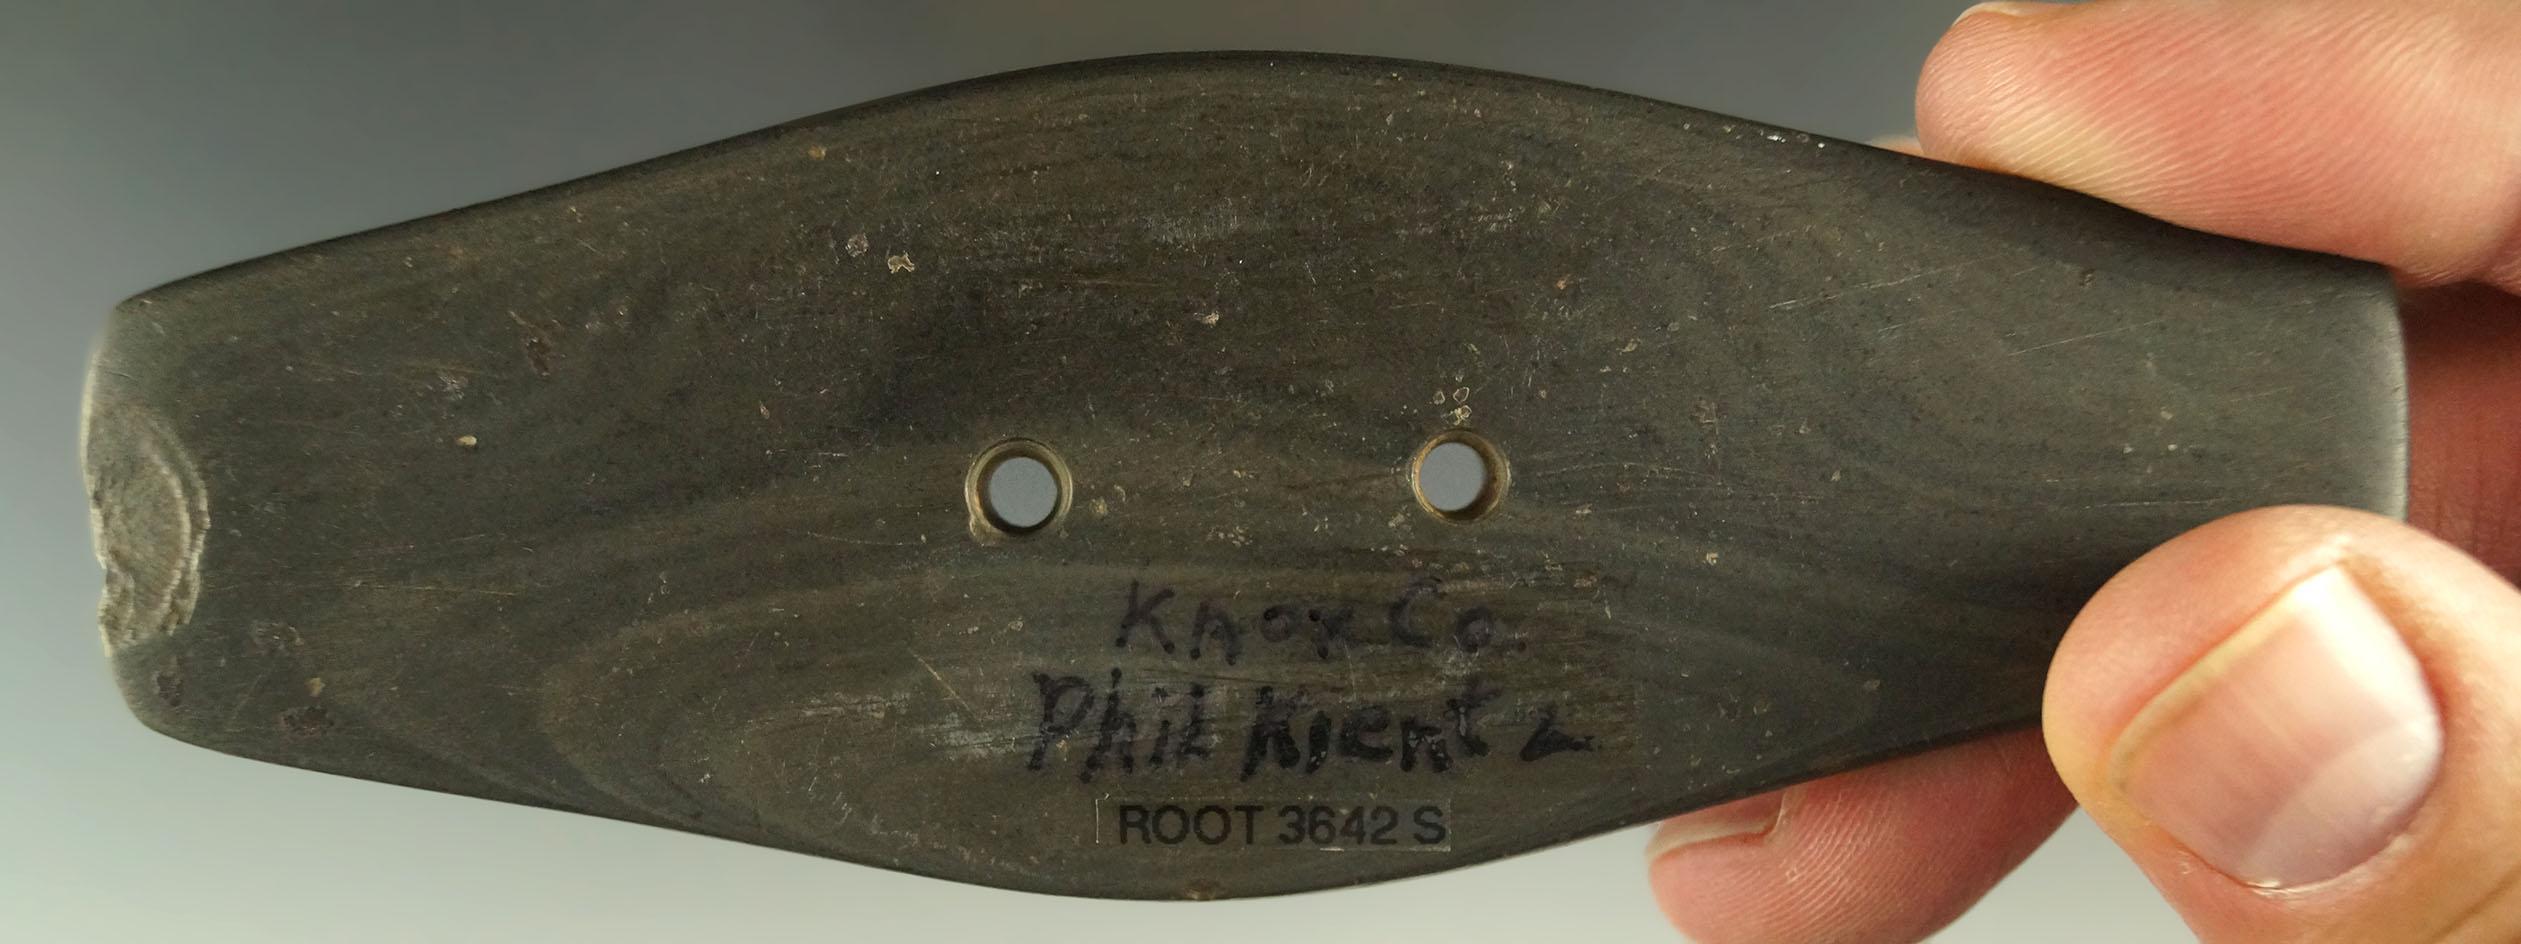 4 3/4" Scooped Hopewell Expanded Center Gorget found in Knox Co., Ohio. Ex. Kientz, Hooks.